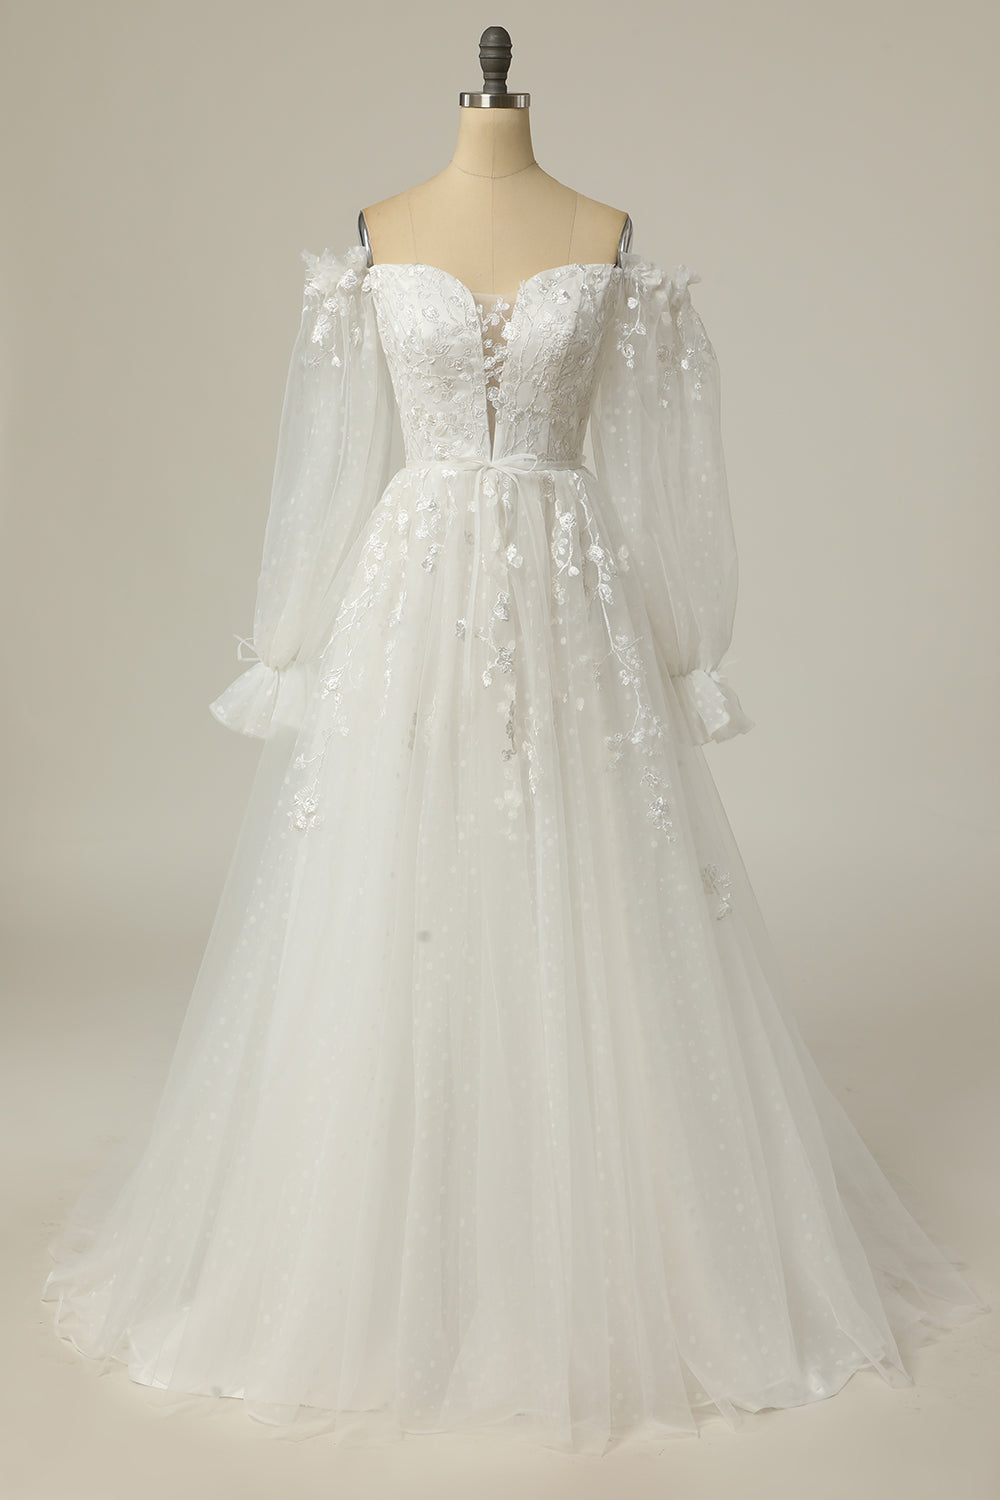 Wedding Dress Under, Luxurious A Line Off the Shoulder White Wedding Dress with Appliques